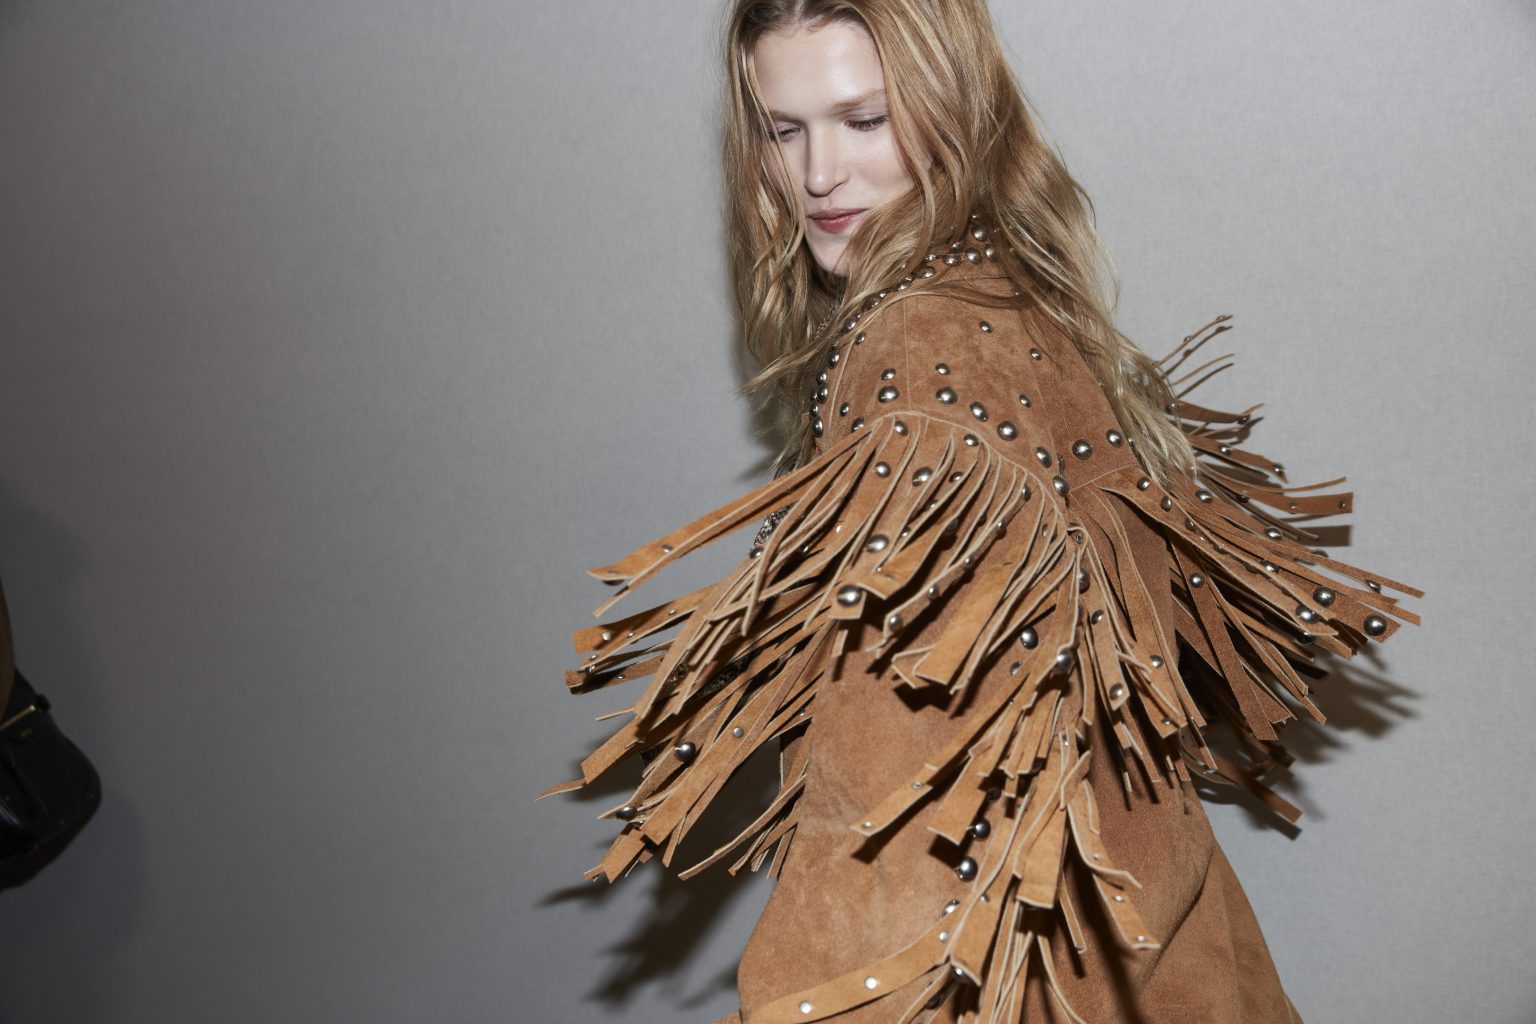 Cropped backstage image of female model wearing a light brown suede fringed jacket with metallic bead details, the fringes flying as she spins.